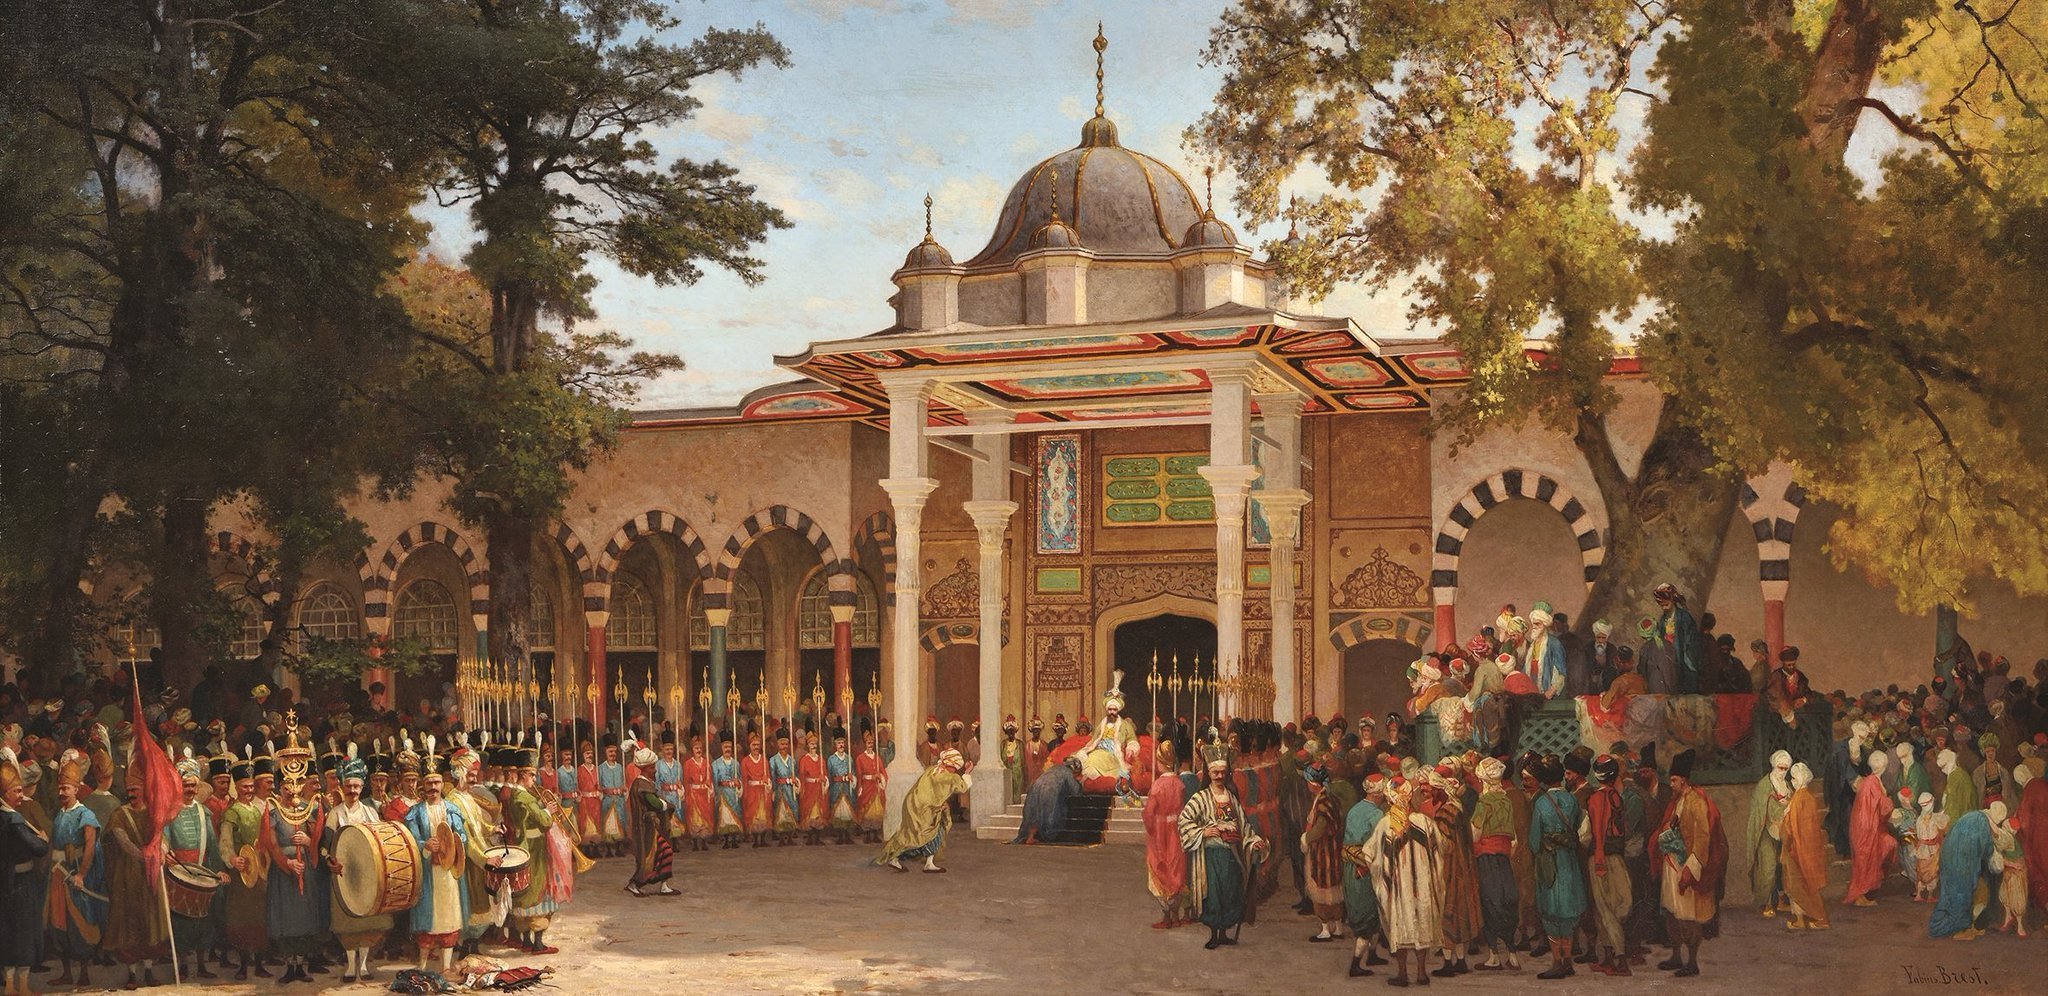 Germain Fabius Brest depicts a reception held in front of the Gate of Felicity in the second courtyard of the Topkapı Palace in his 1865-dated “Bayram Greetings Reception.